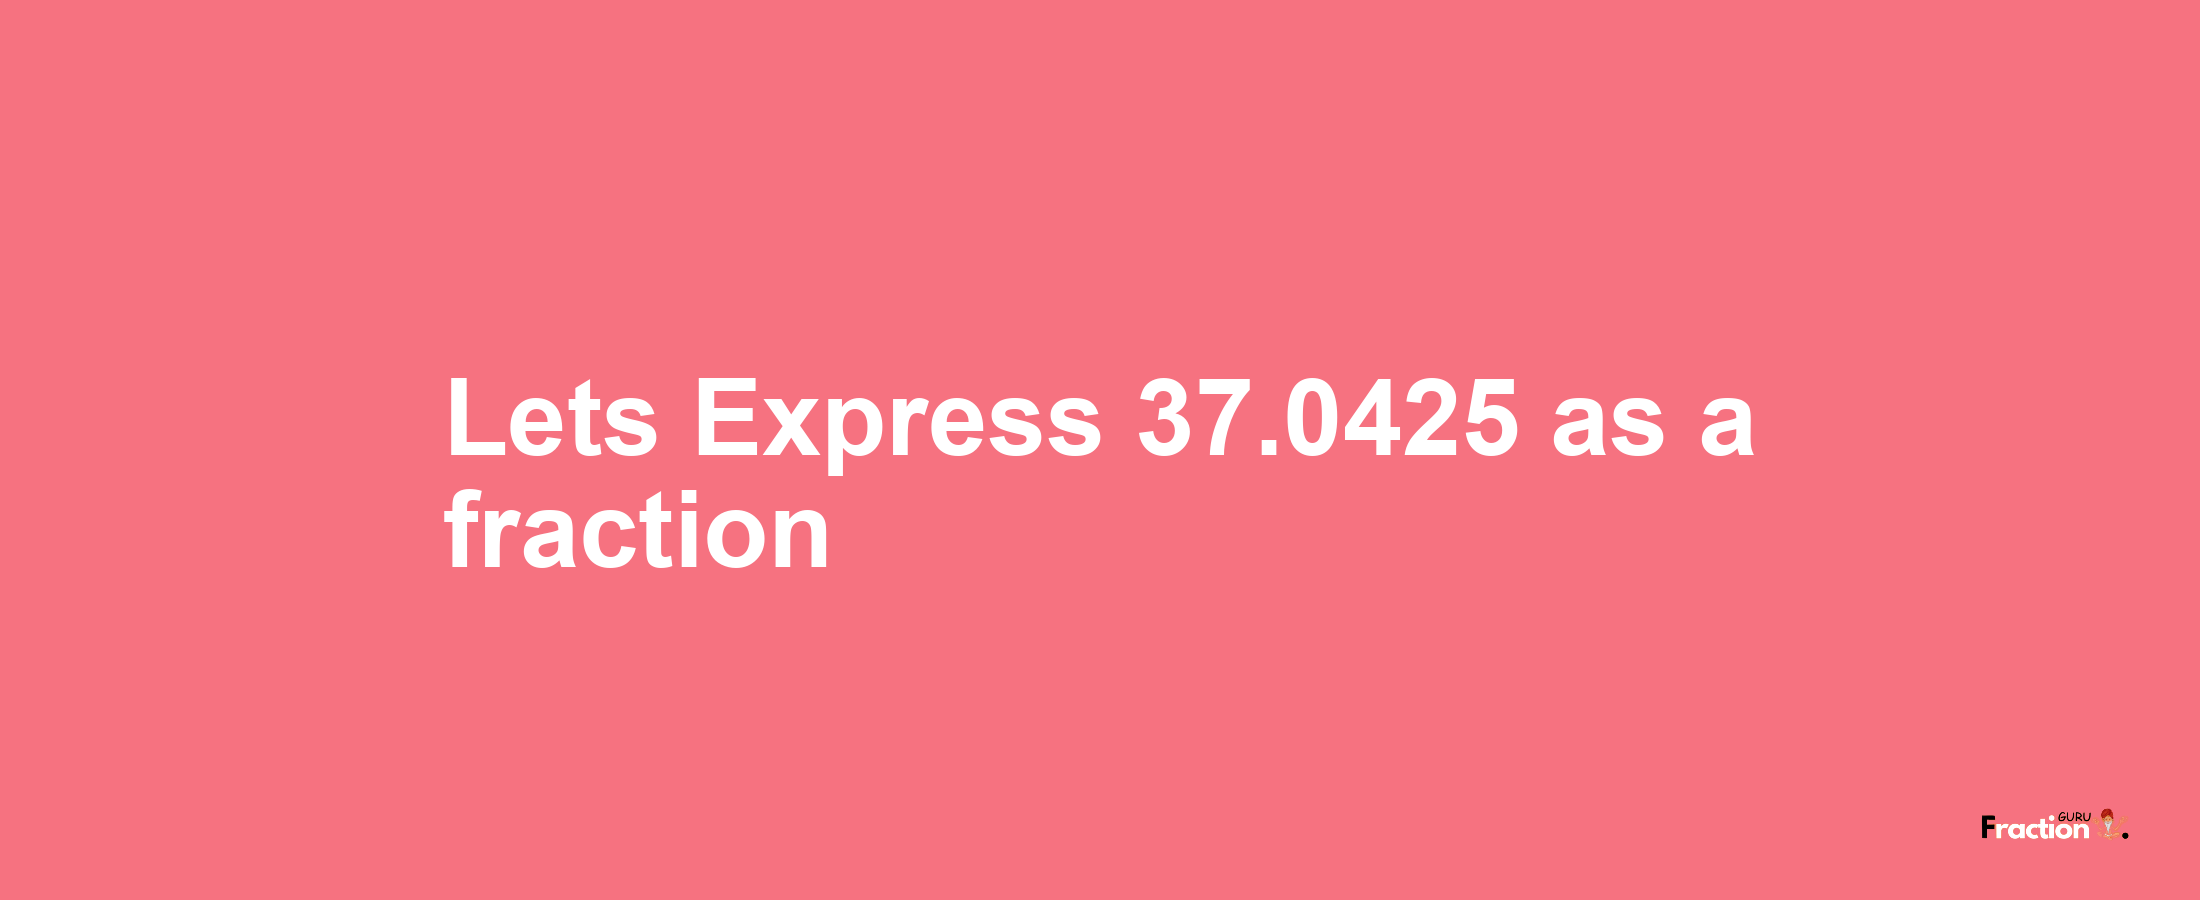 Lets Express 37.0425 as afraction